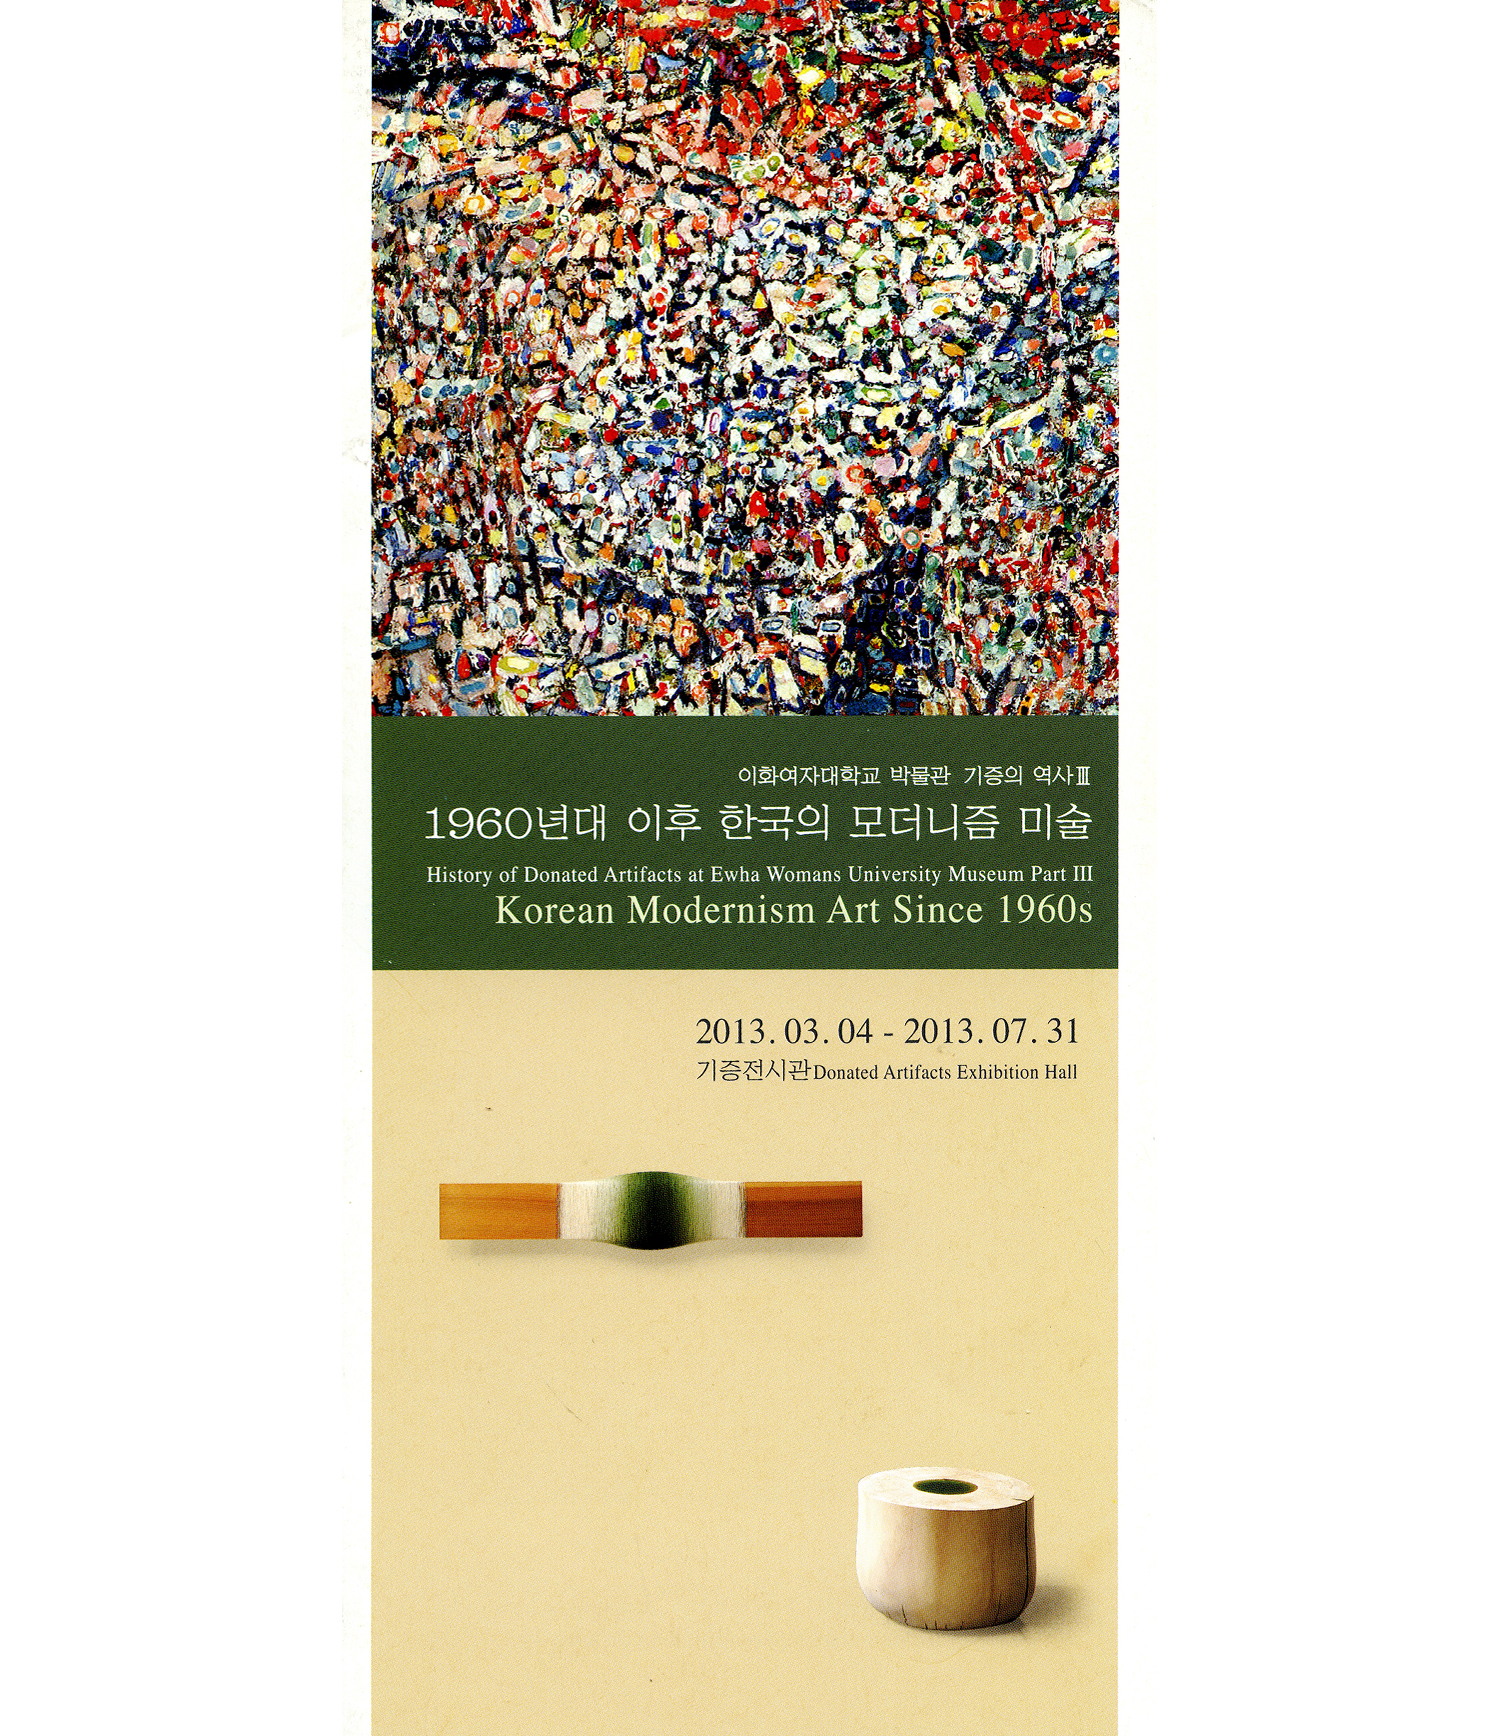 History of Donated Artifacts Part III: Korean Modernism Art Since 1960s